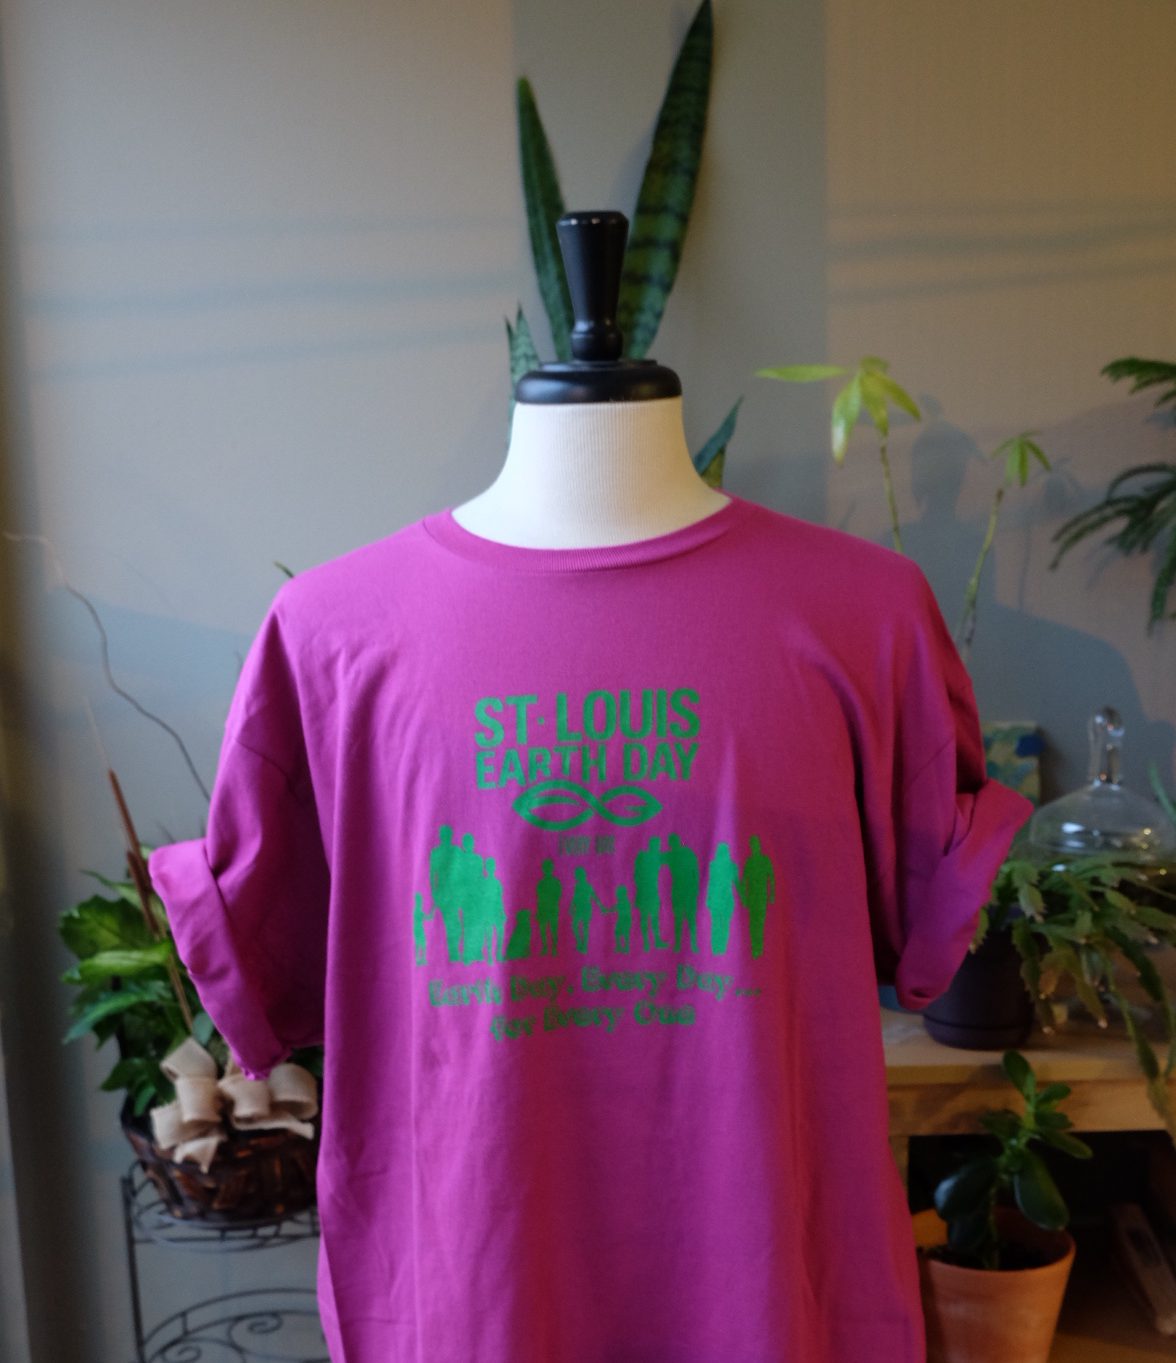 2017 St. Louis Earth Day Volunteer T-shirt